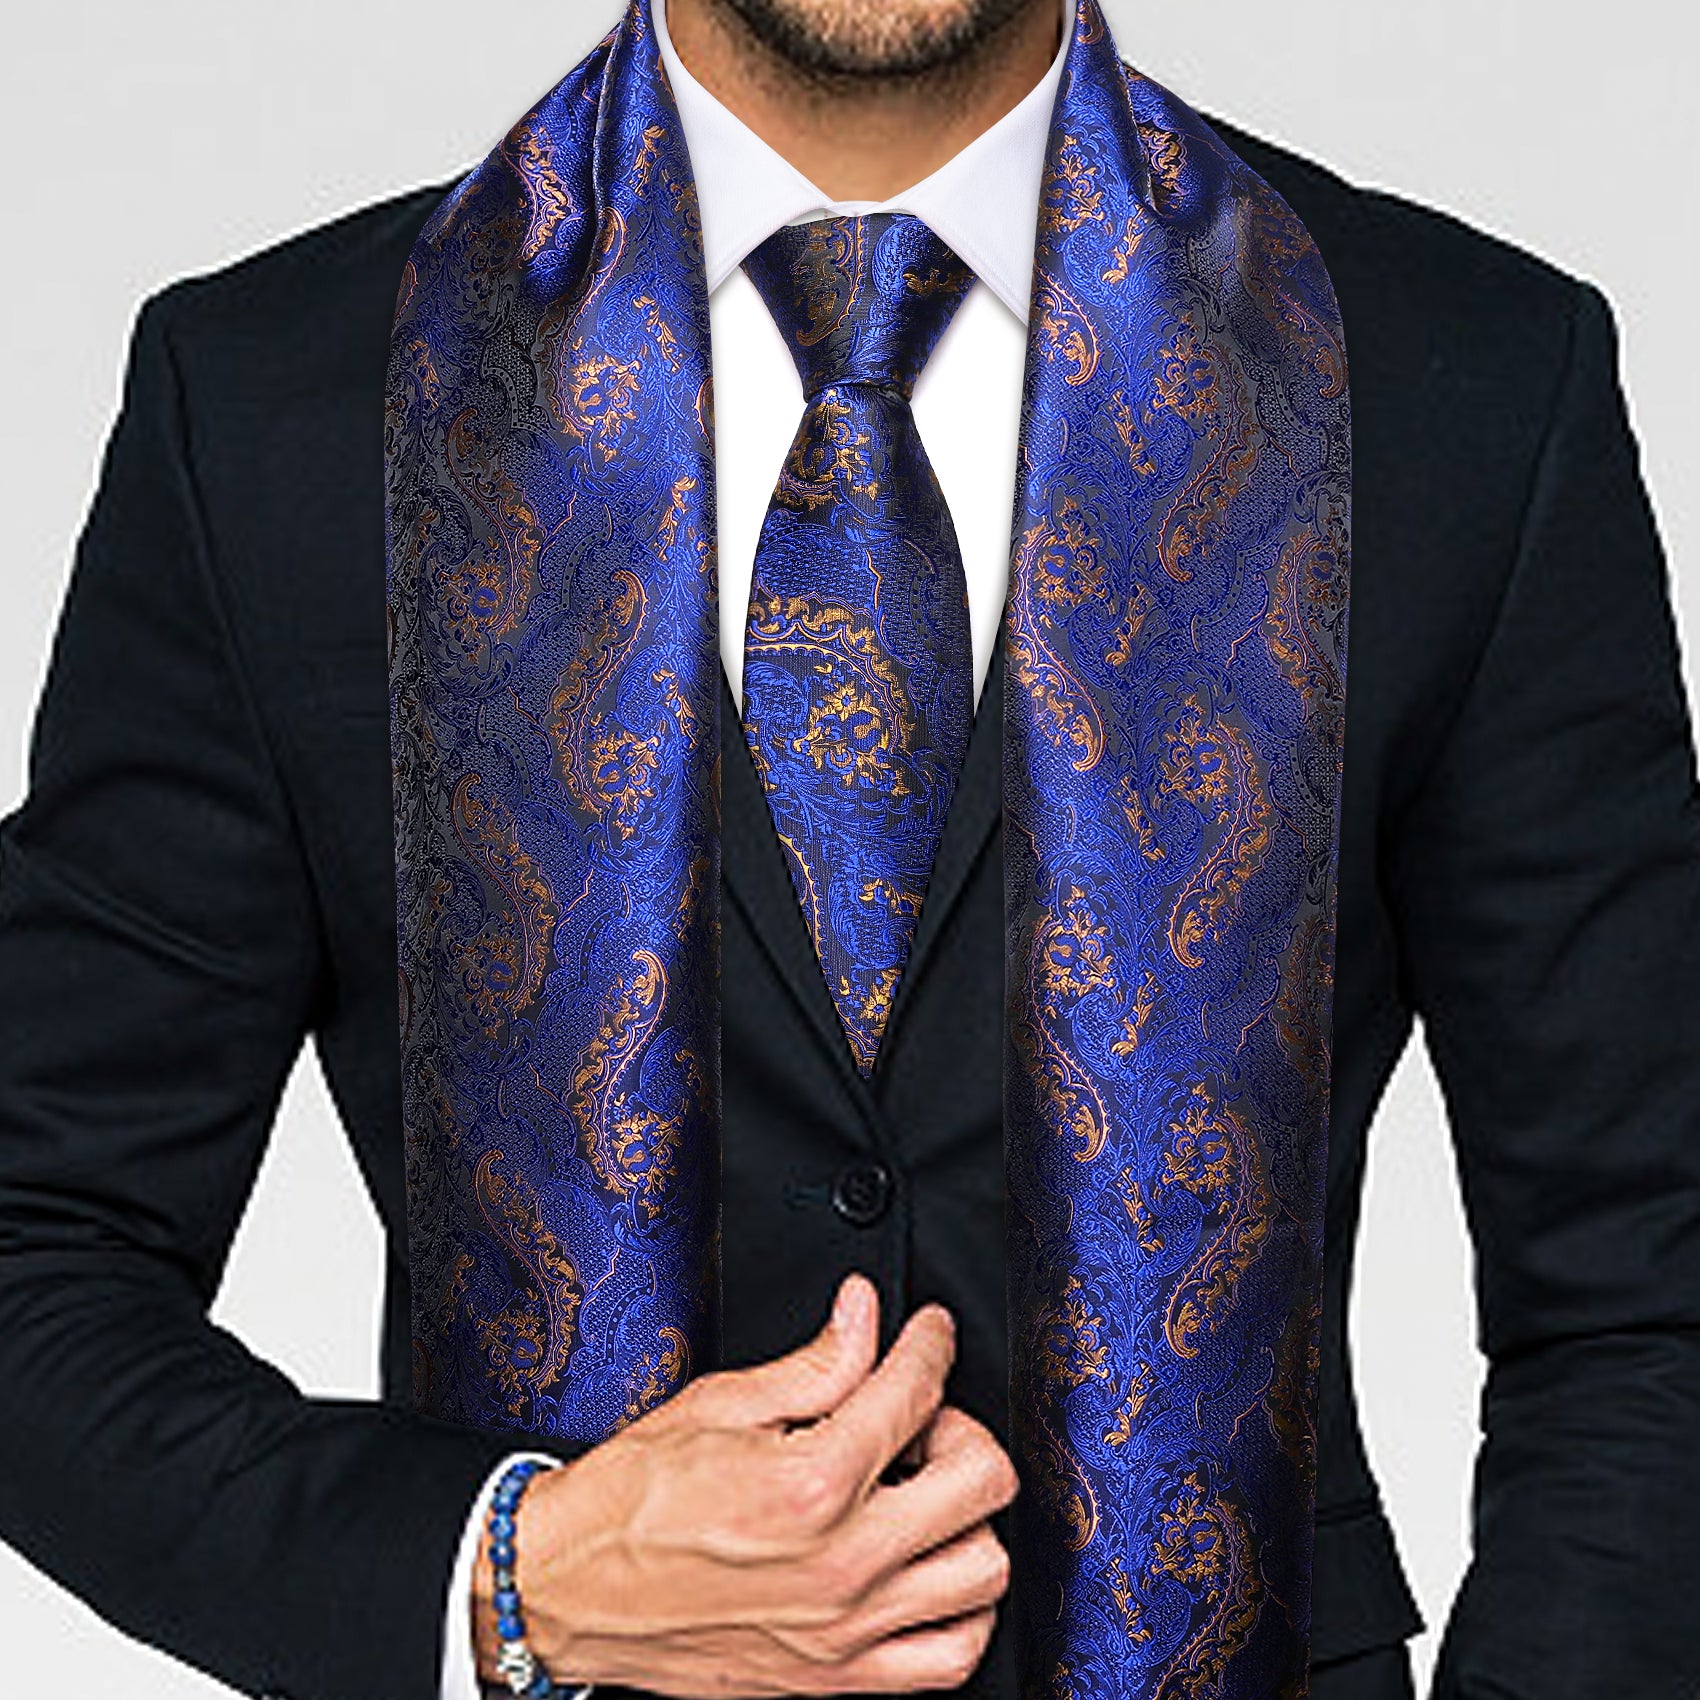 Luxury Blue Golden Paisley Scarf with Tie Set